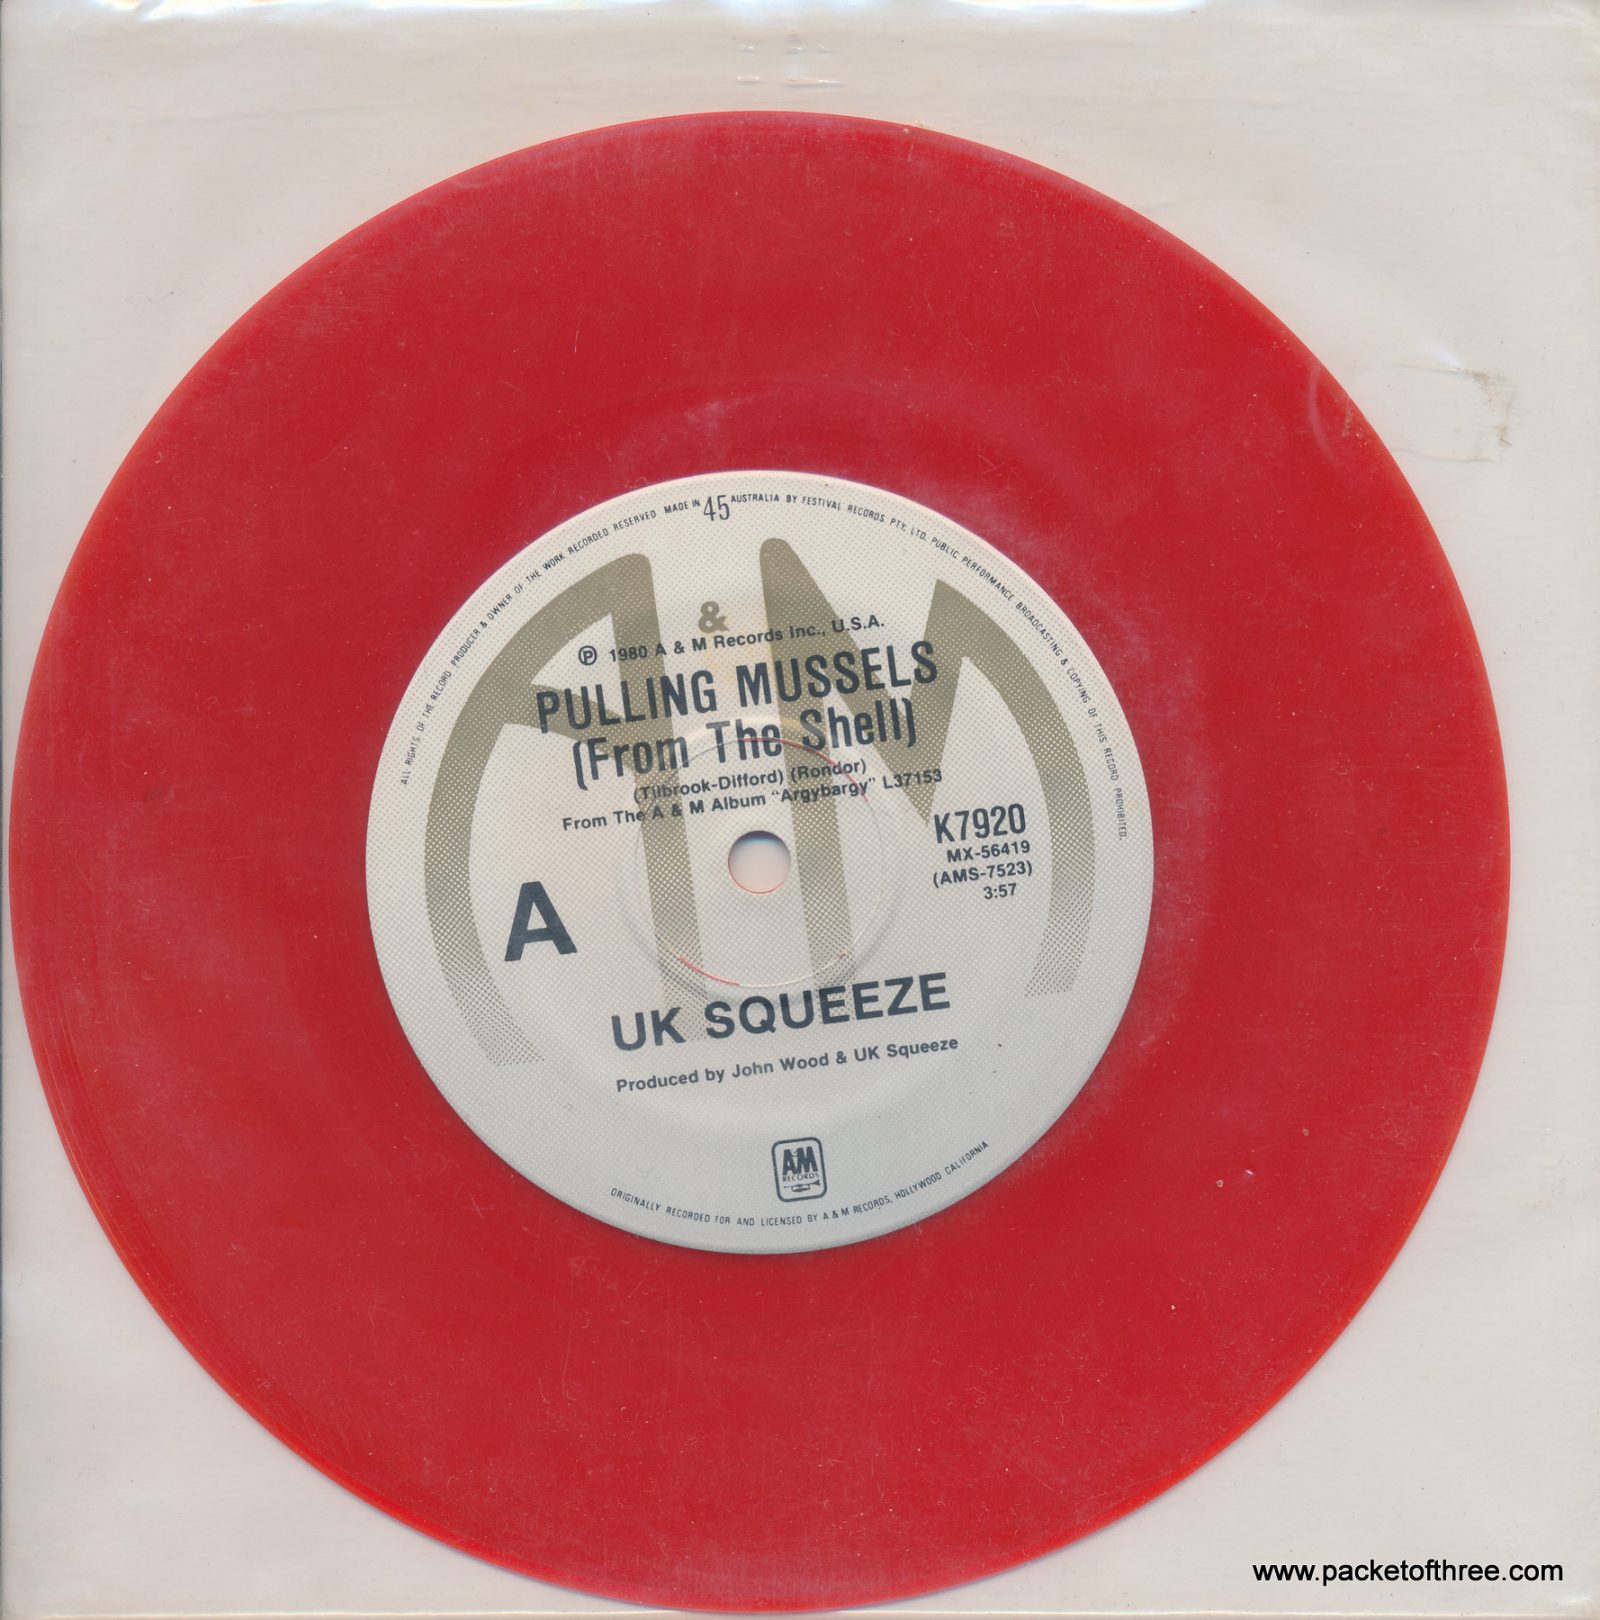 Pulling Mussels (From the Shell) - Australia - 7" - red vinyl - plastic sleeve